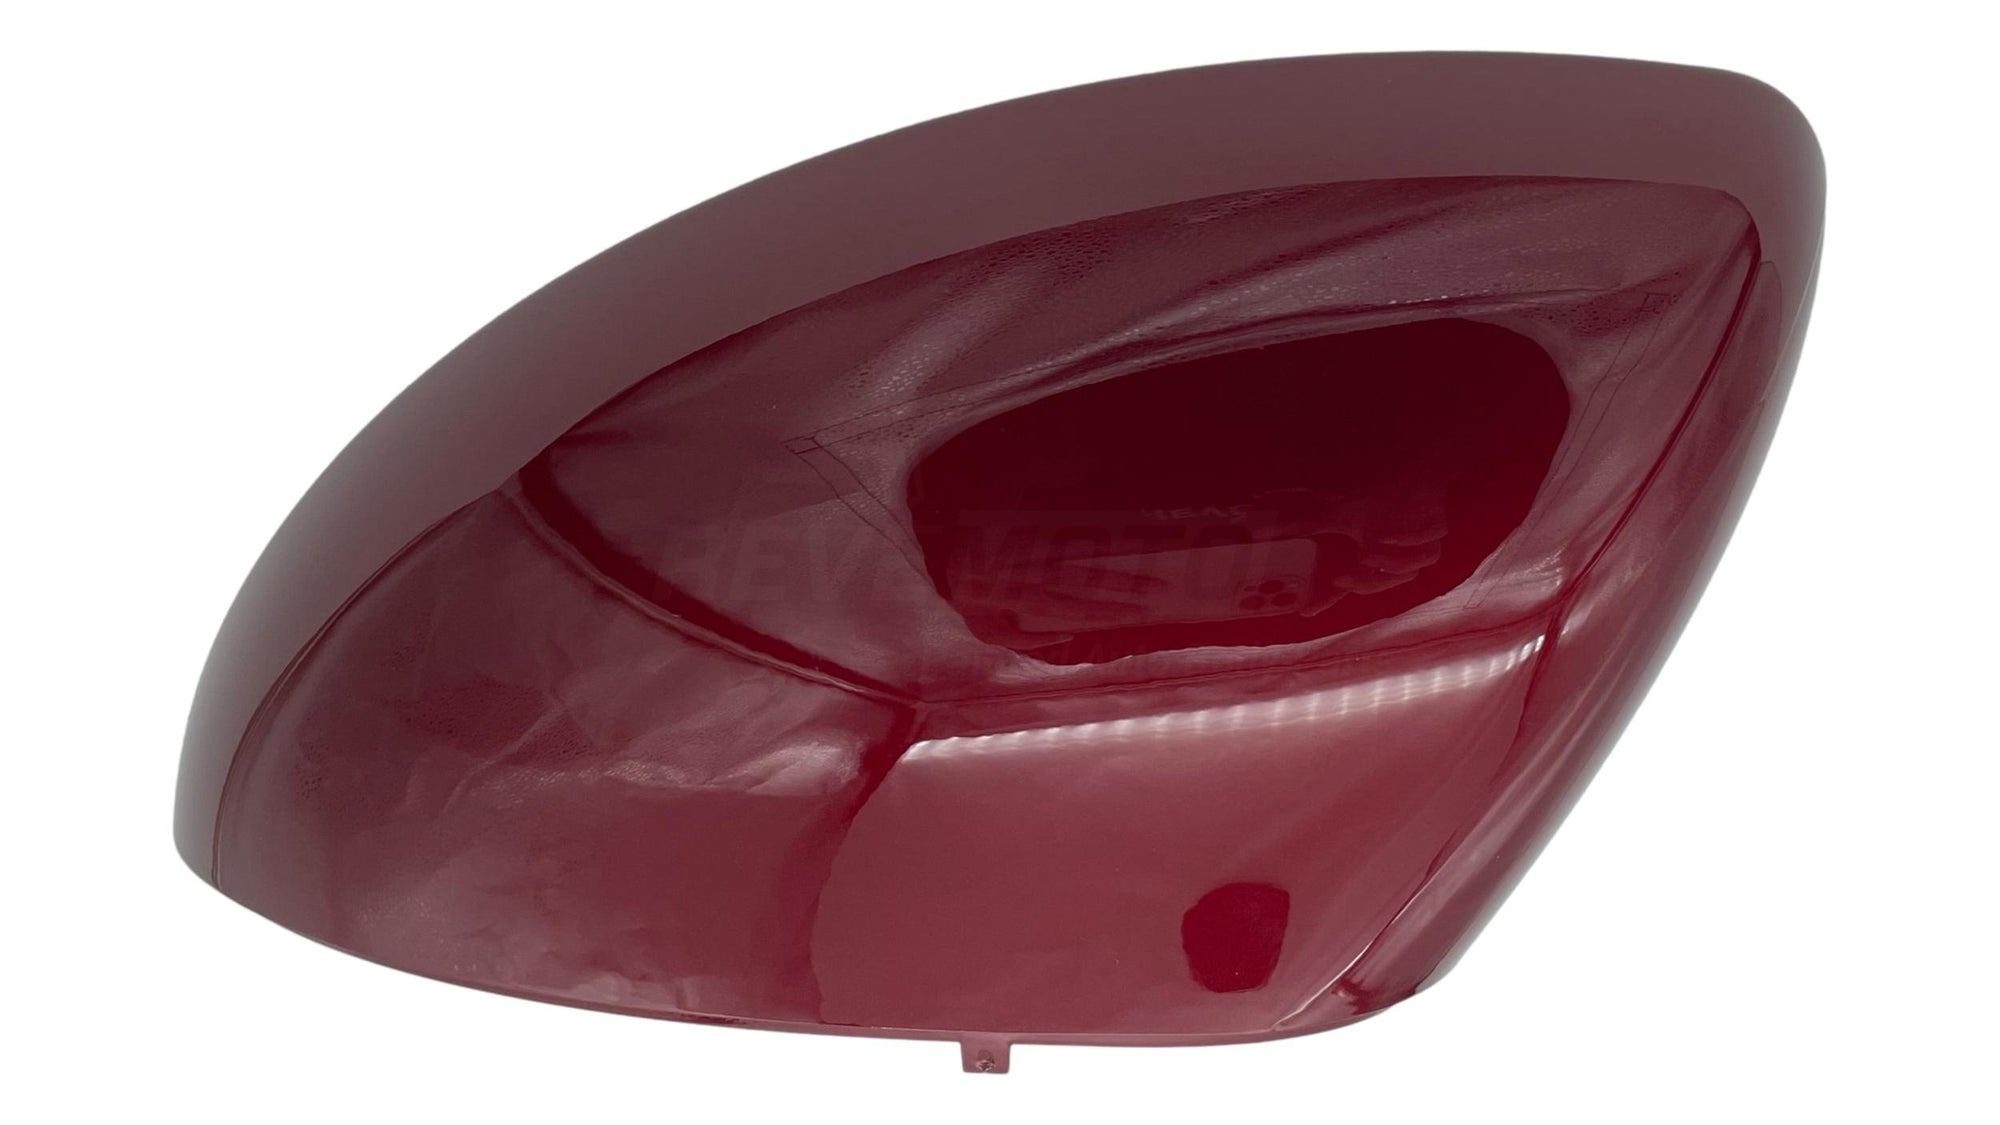 24580 - 2019-2023 Nissan Altima Side View Mirror Cover Painted (Driver) Scarlet Ember Metallic (NBL) 963746CA9A